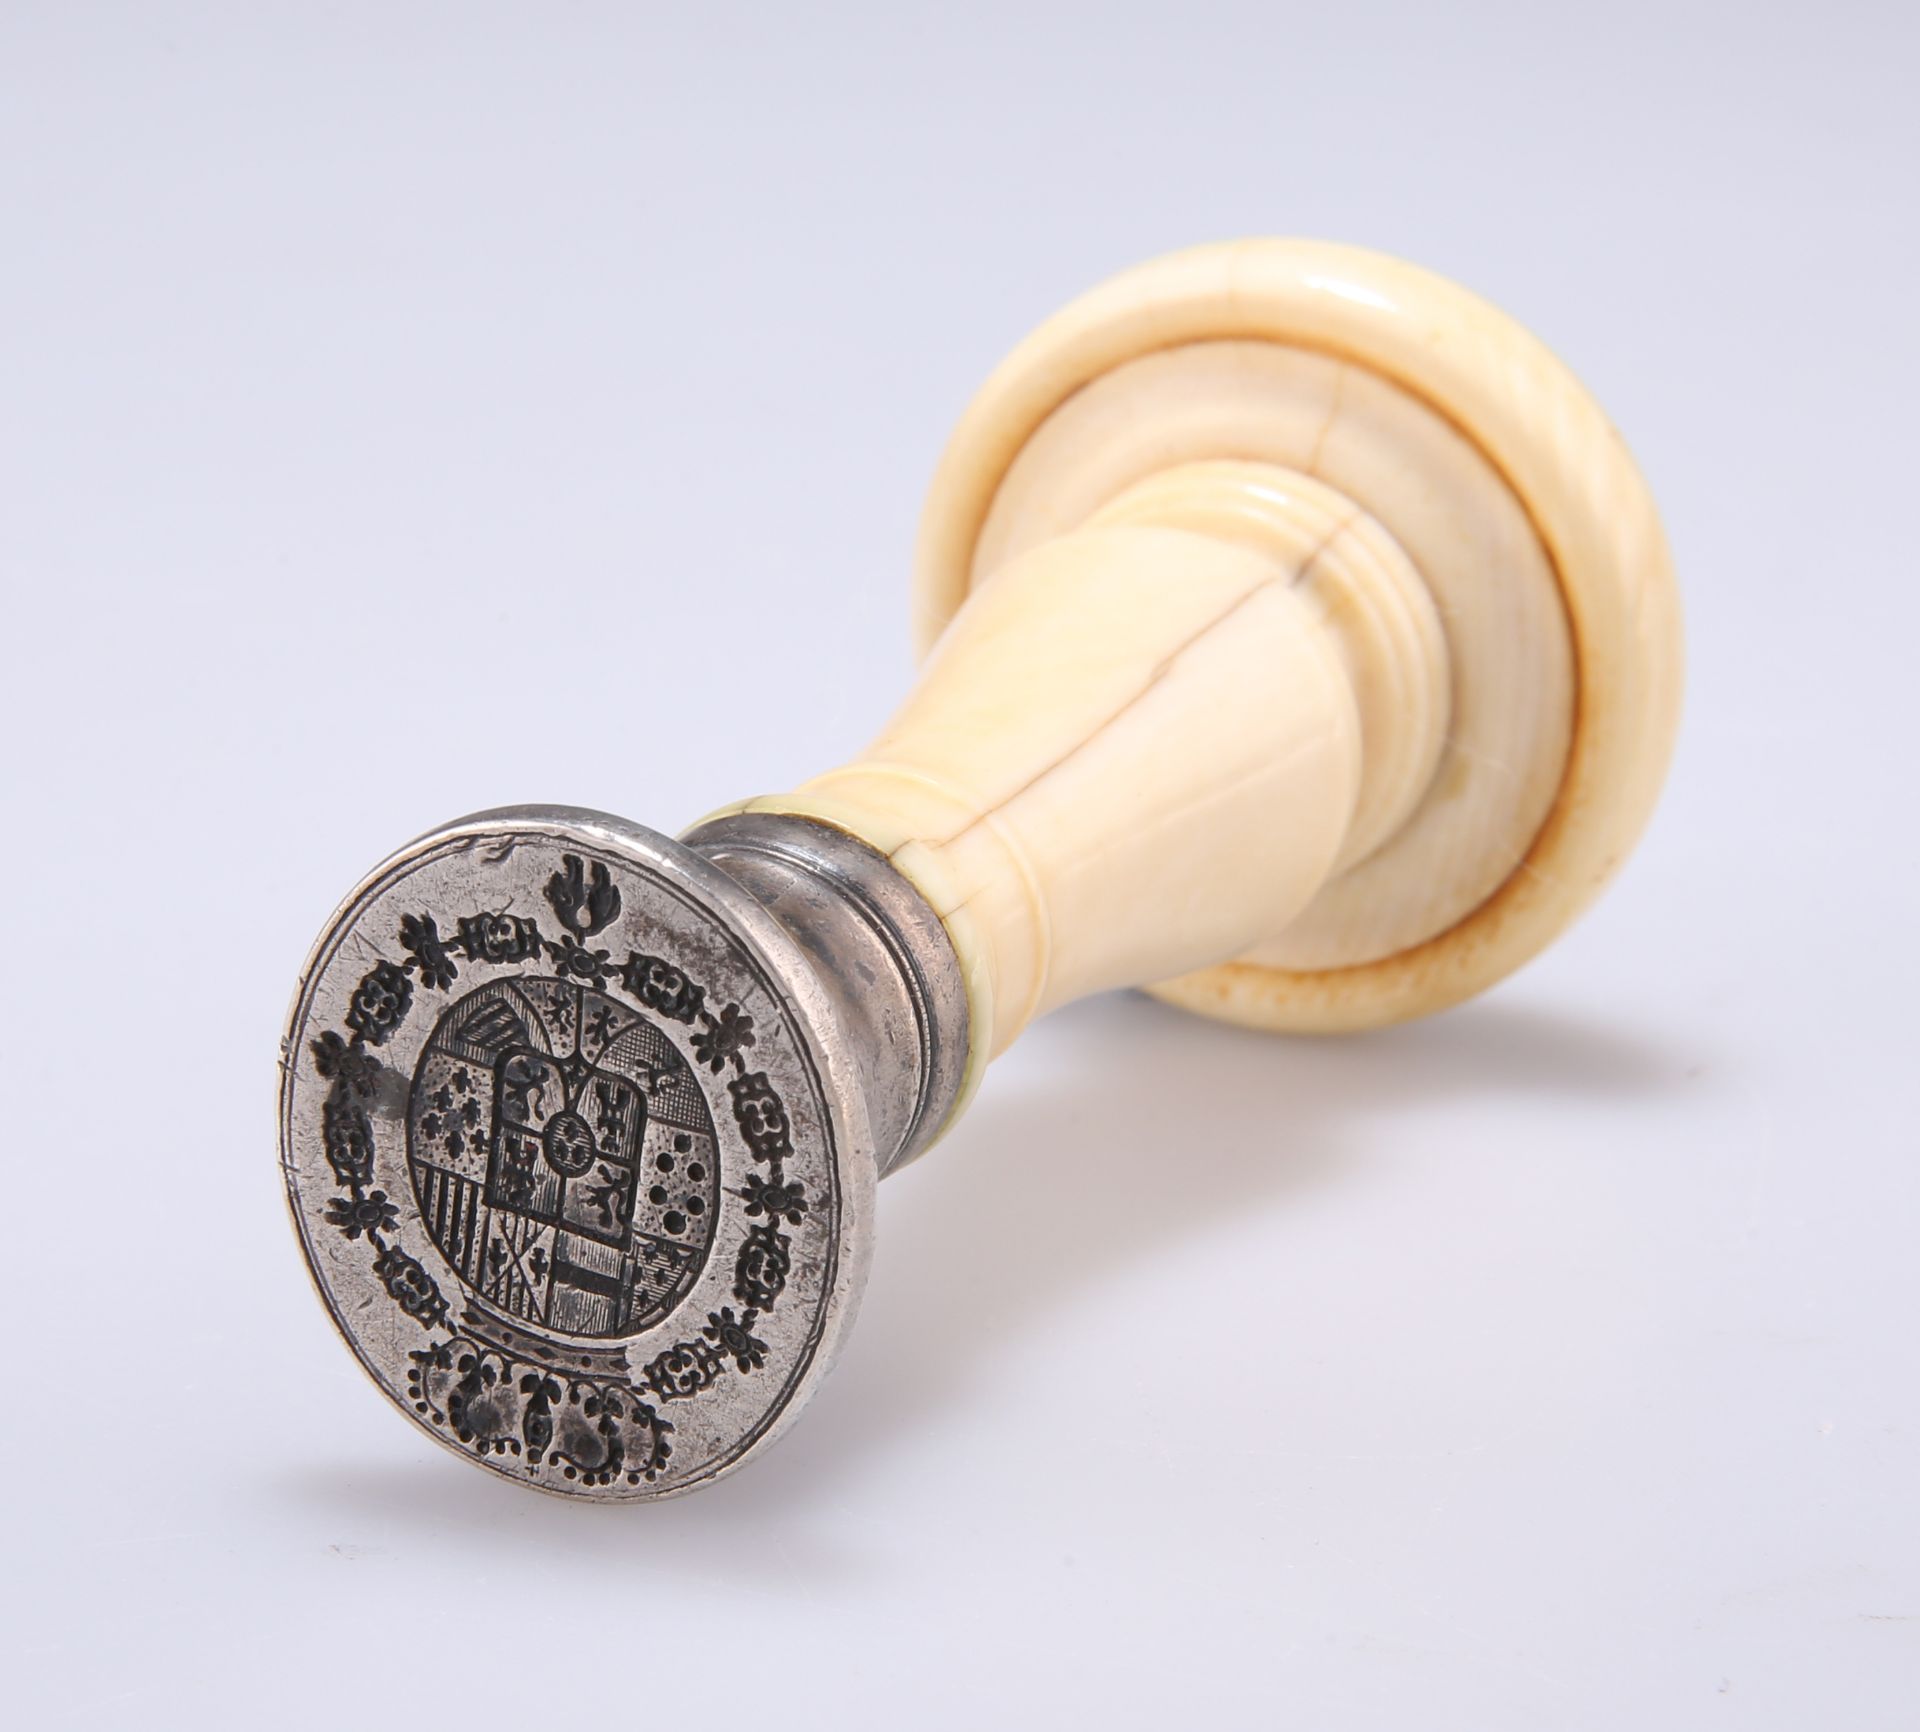 A 19TH CENTURY IVORY-HANDLED SEAL, the white-metal matrix with Royal Coat of Arms of Spain with